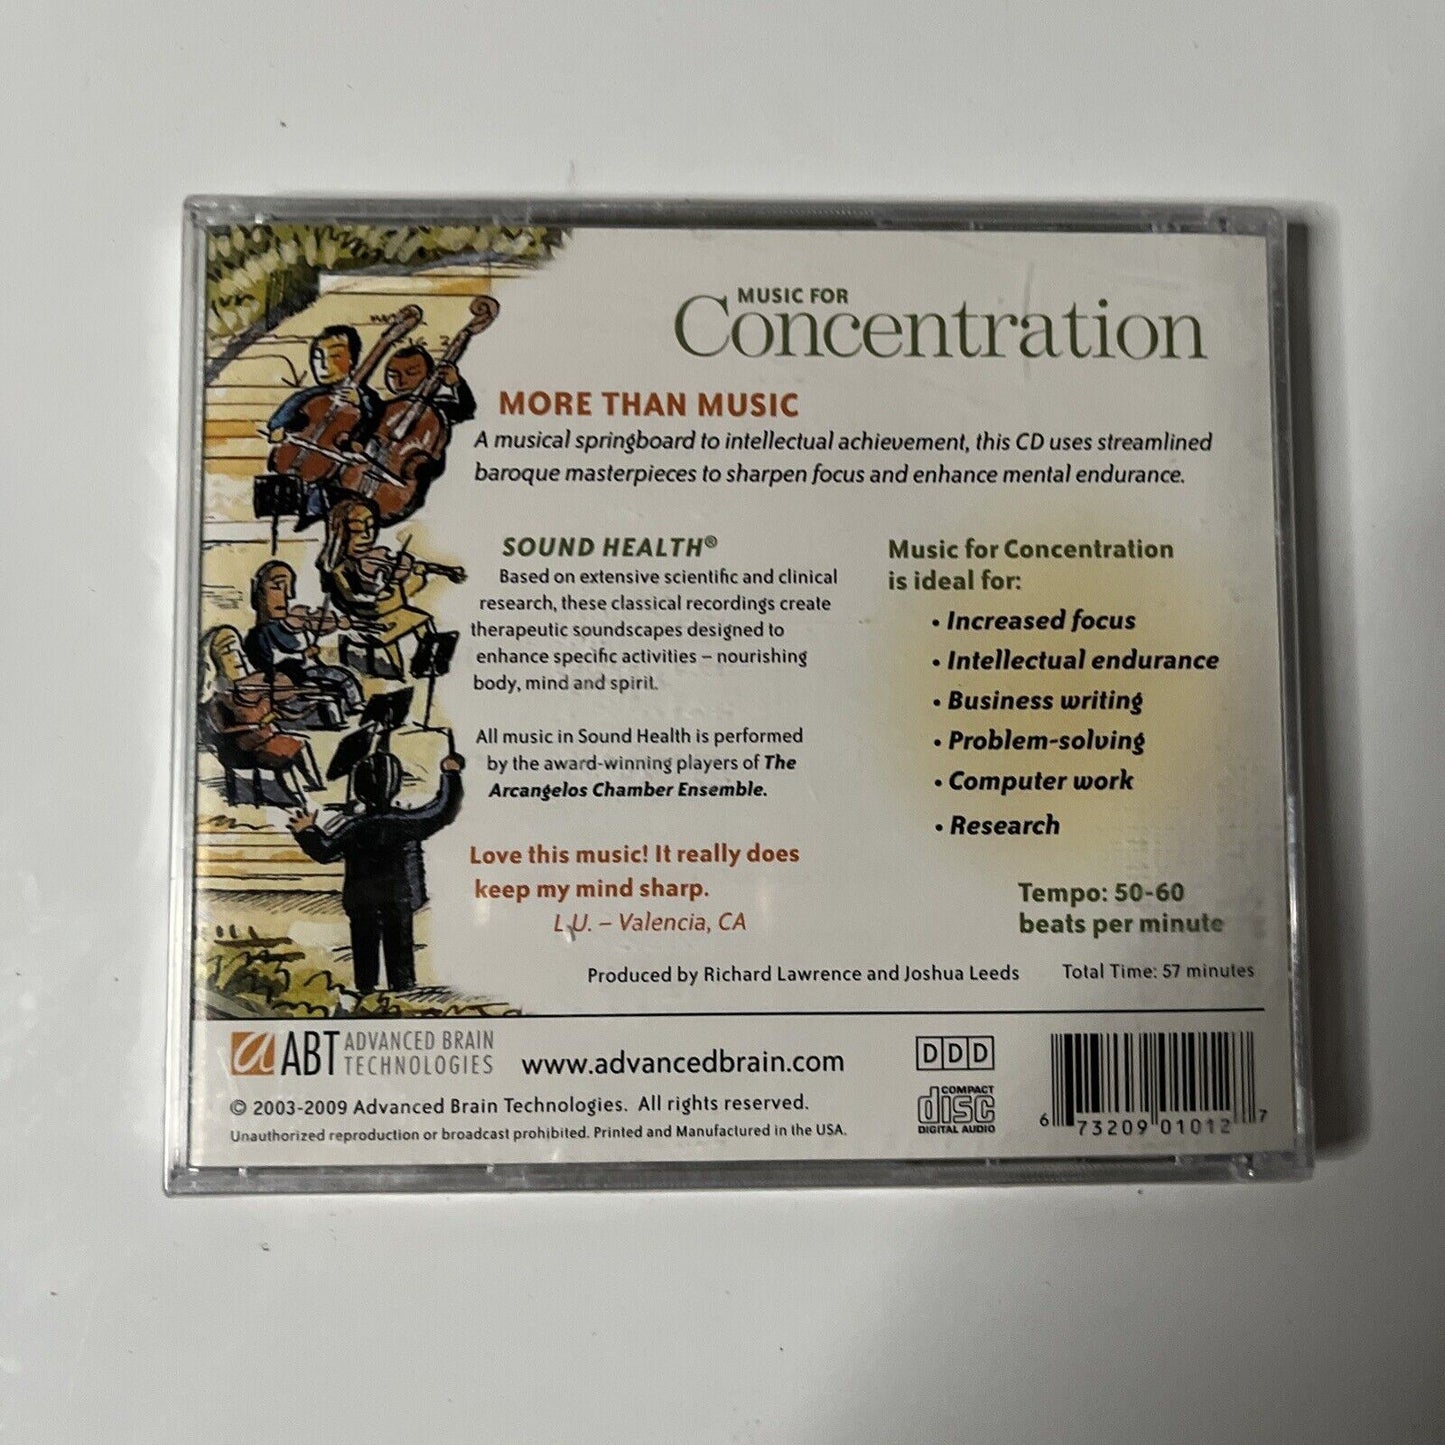 *New* The Arcangelos Chamber Ensemble - Music for Concentration (CD, 1998)